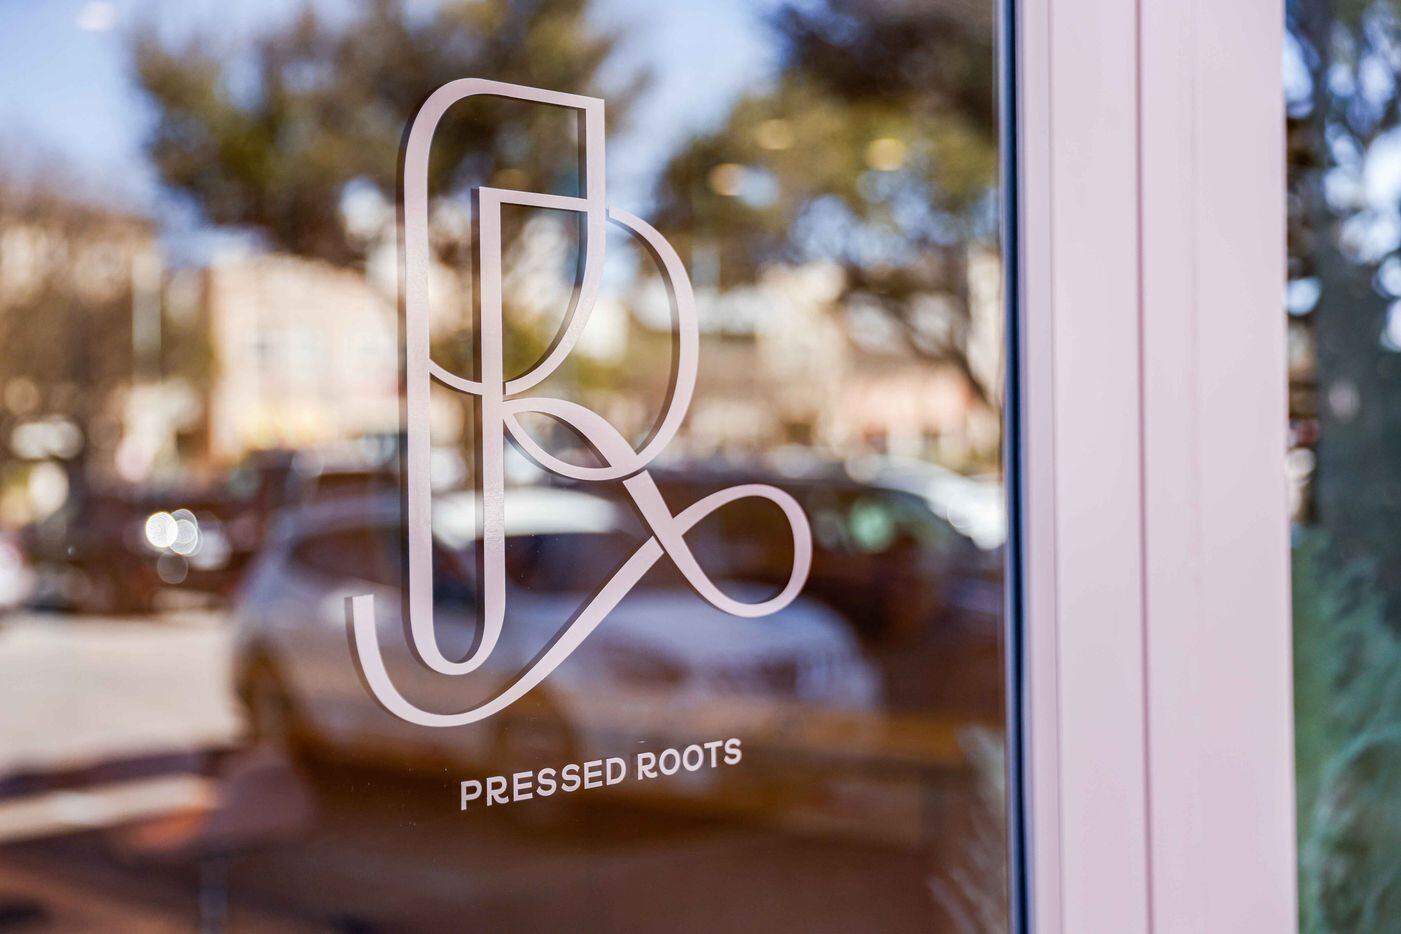 Pressed Roots in Plano on Thursday, February 10, 2022. The company reimagin the traditional...